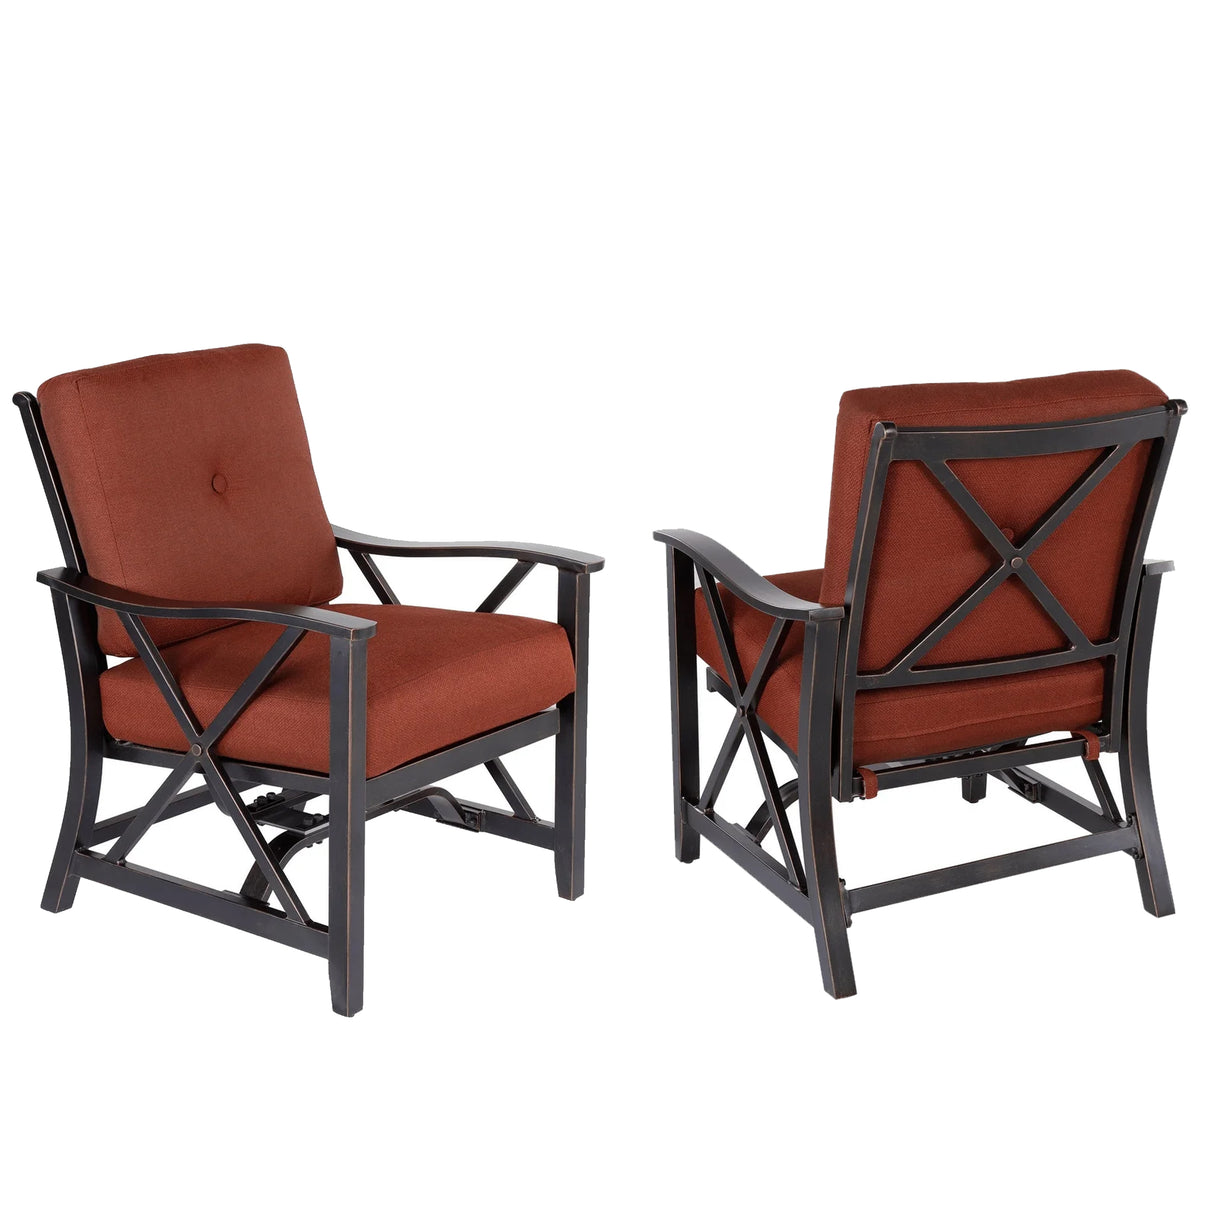 Aluminum Deep Seating Rocking Club Chairs in Antique Copper (set of 2)